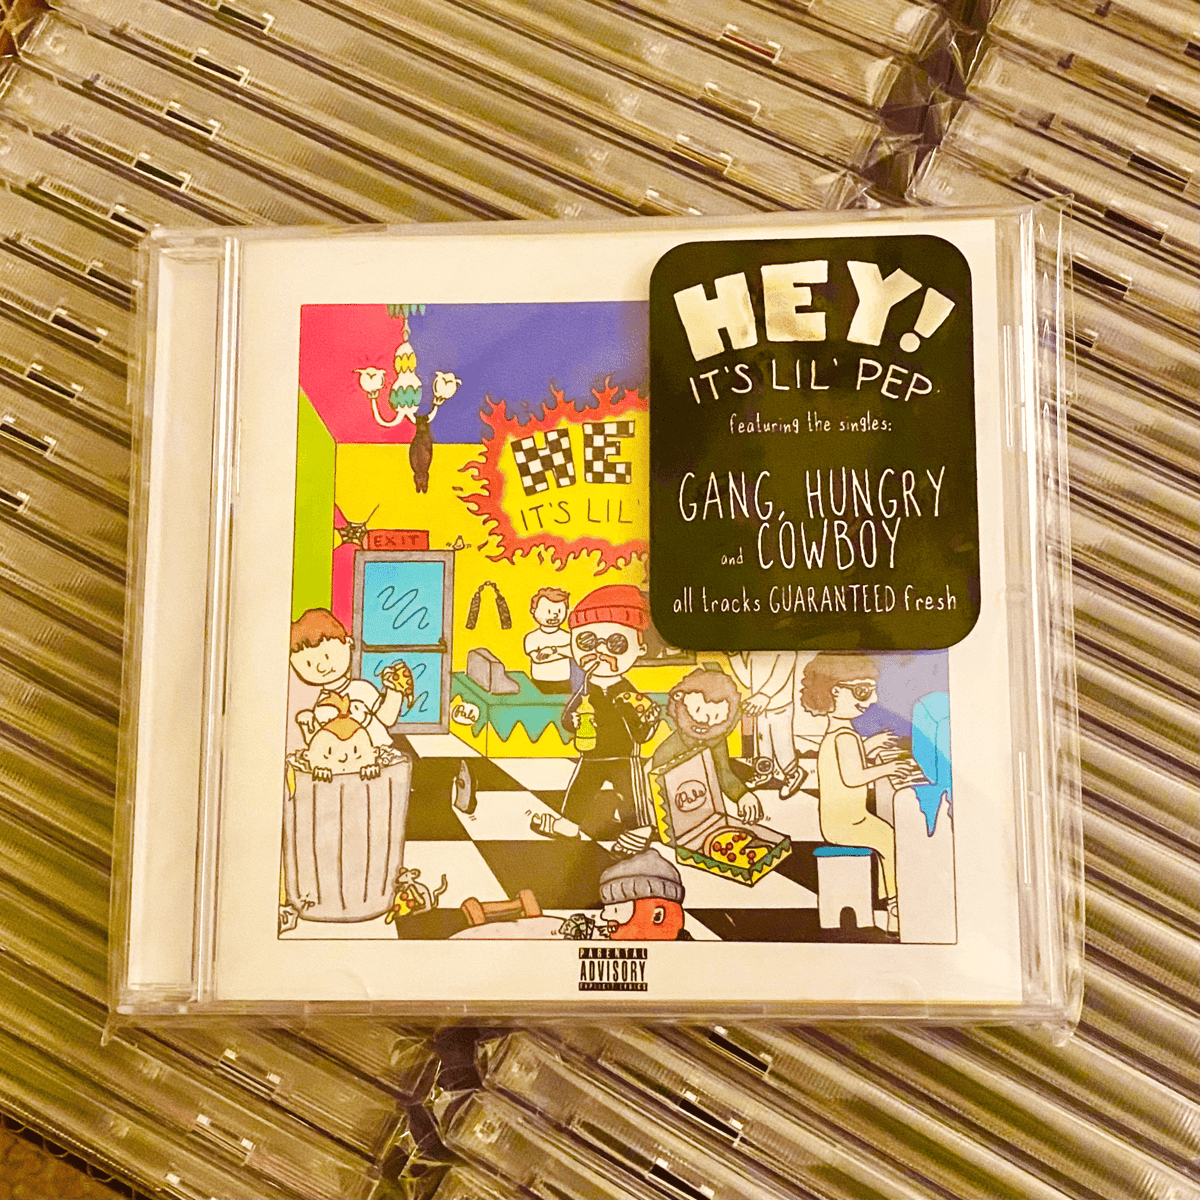 Image of HEY! IT'S LIL PEP - CD (Limited Edition)